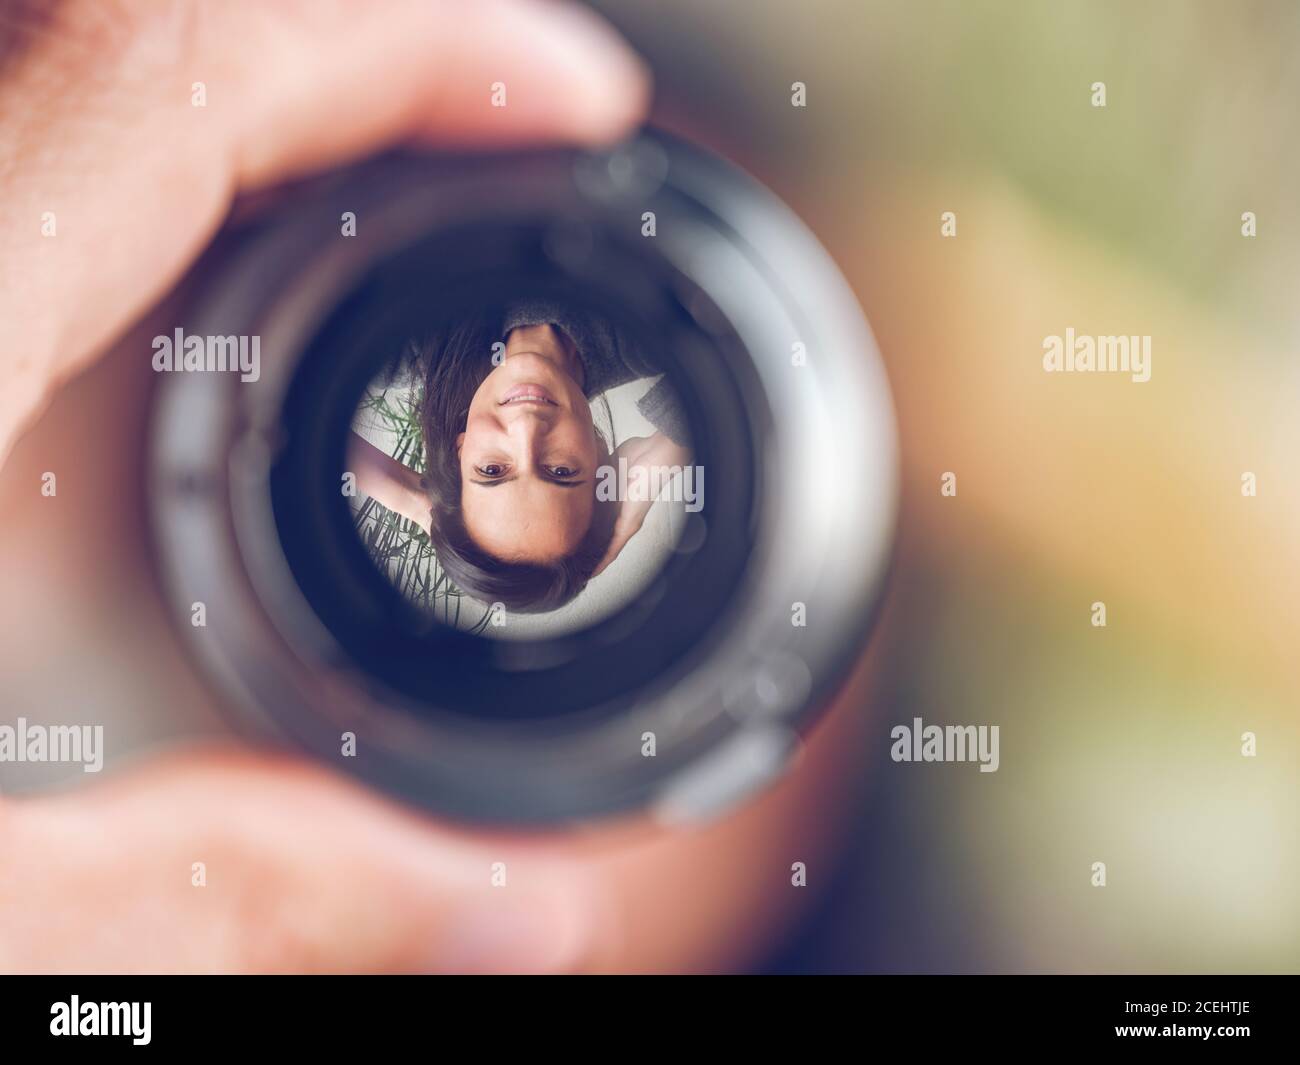 Closeup shot of crop hand holding lens with reversed image of smiling Woman on blurred background Stock Photo